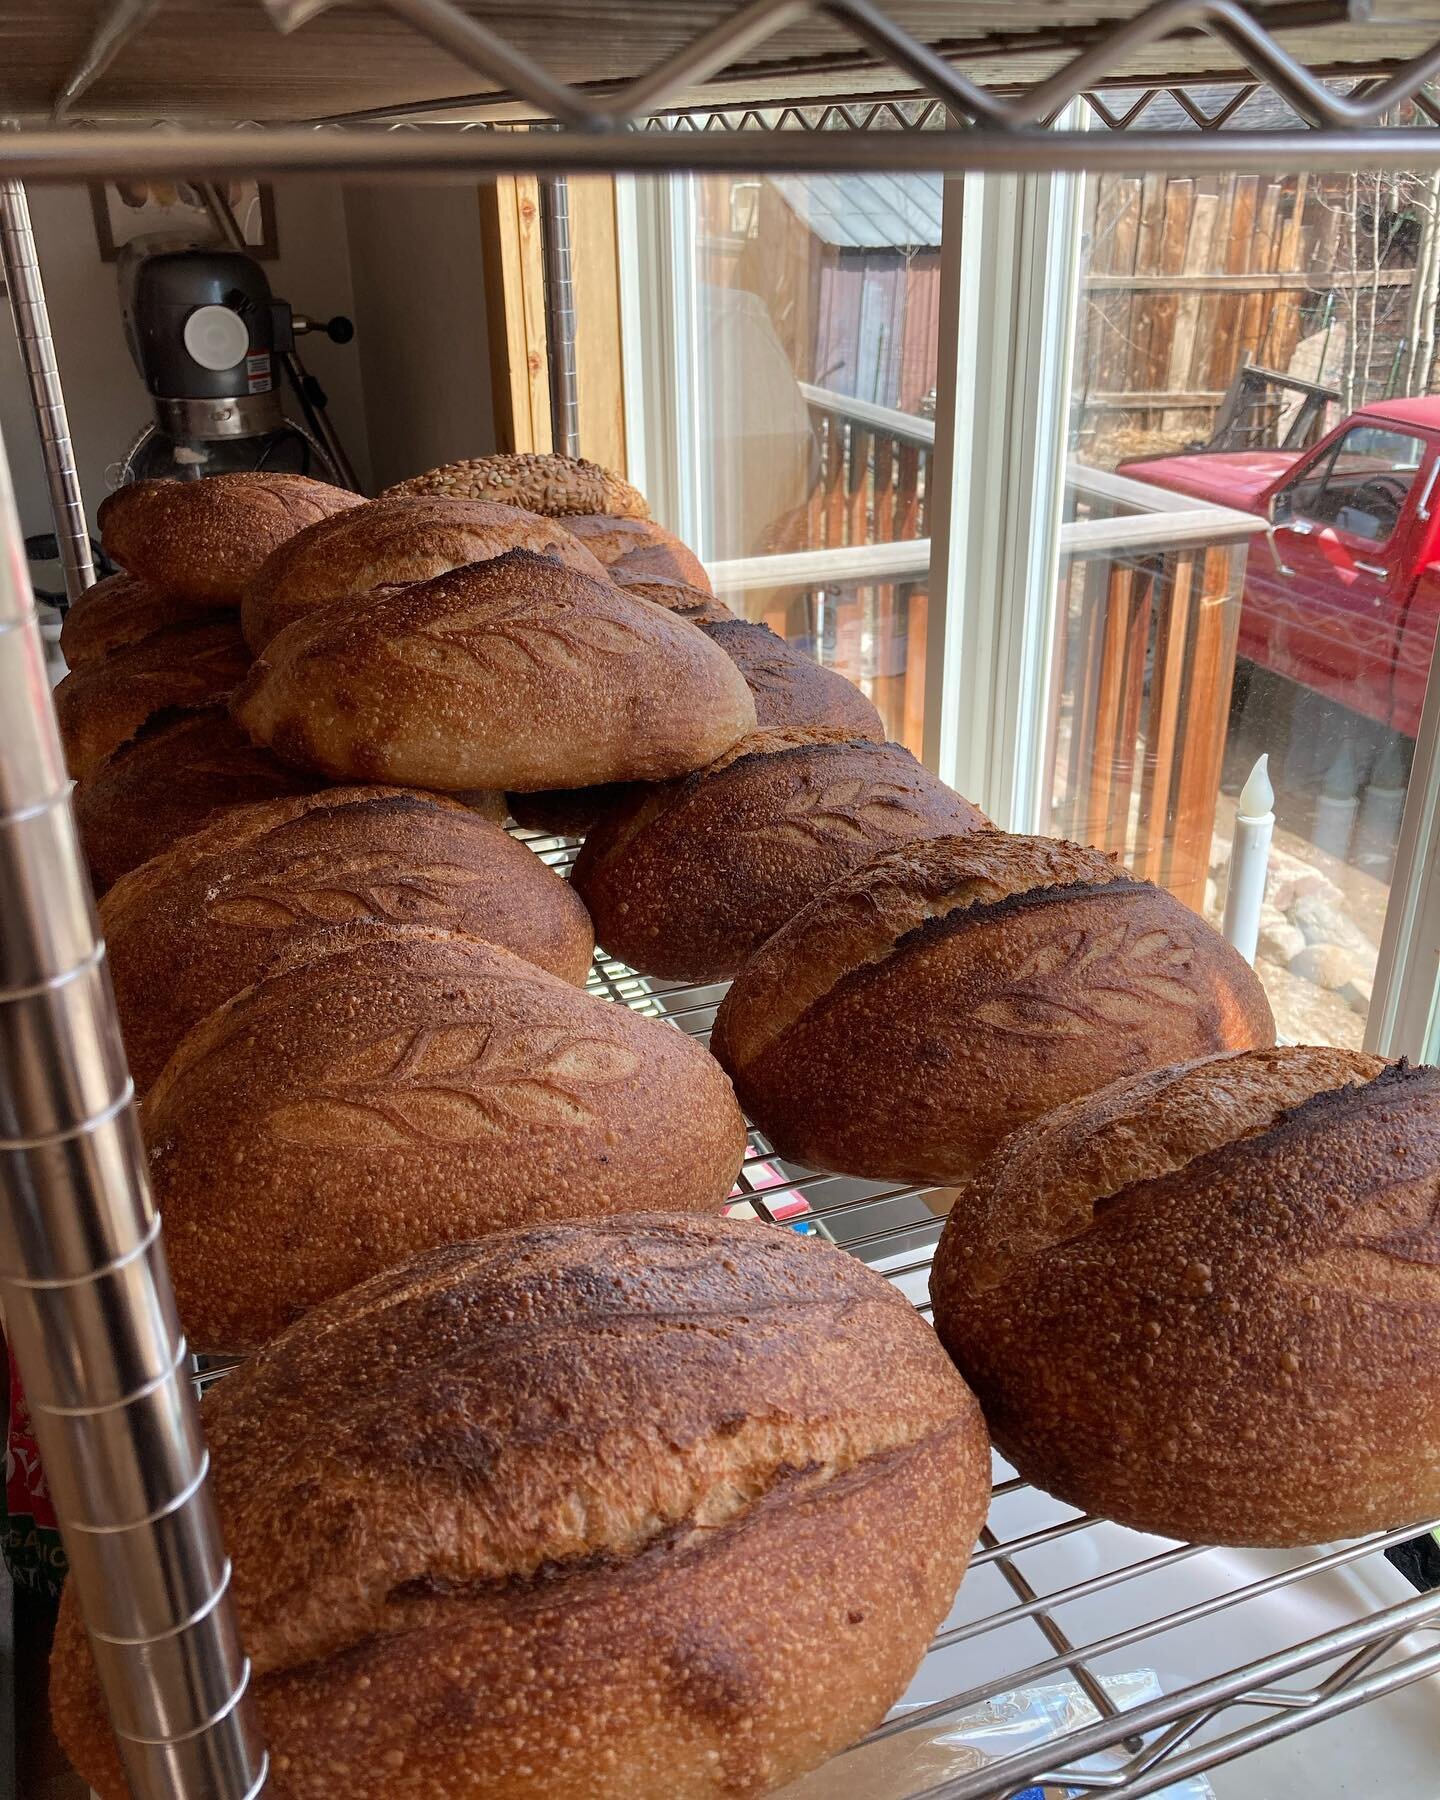 quick reminder that there is no bread next Friday-we will be back in action the following Friday, May 26th. 

see you then! 

#sourdough #cottagebaker #almaco